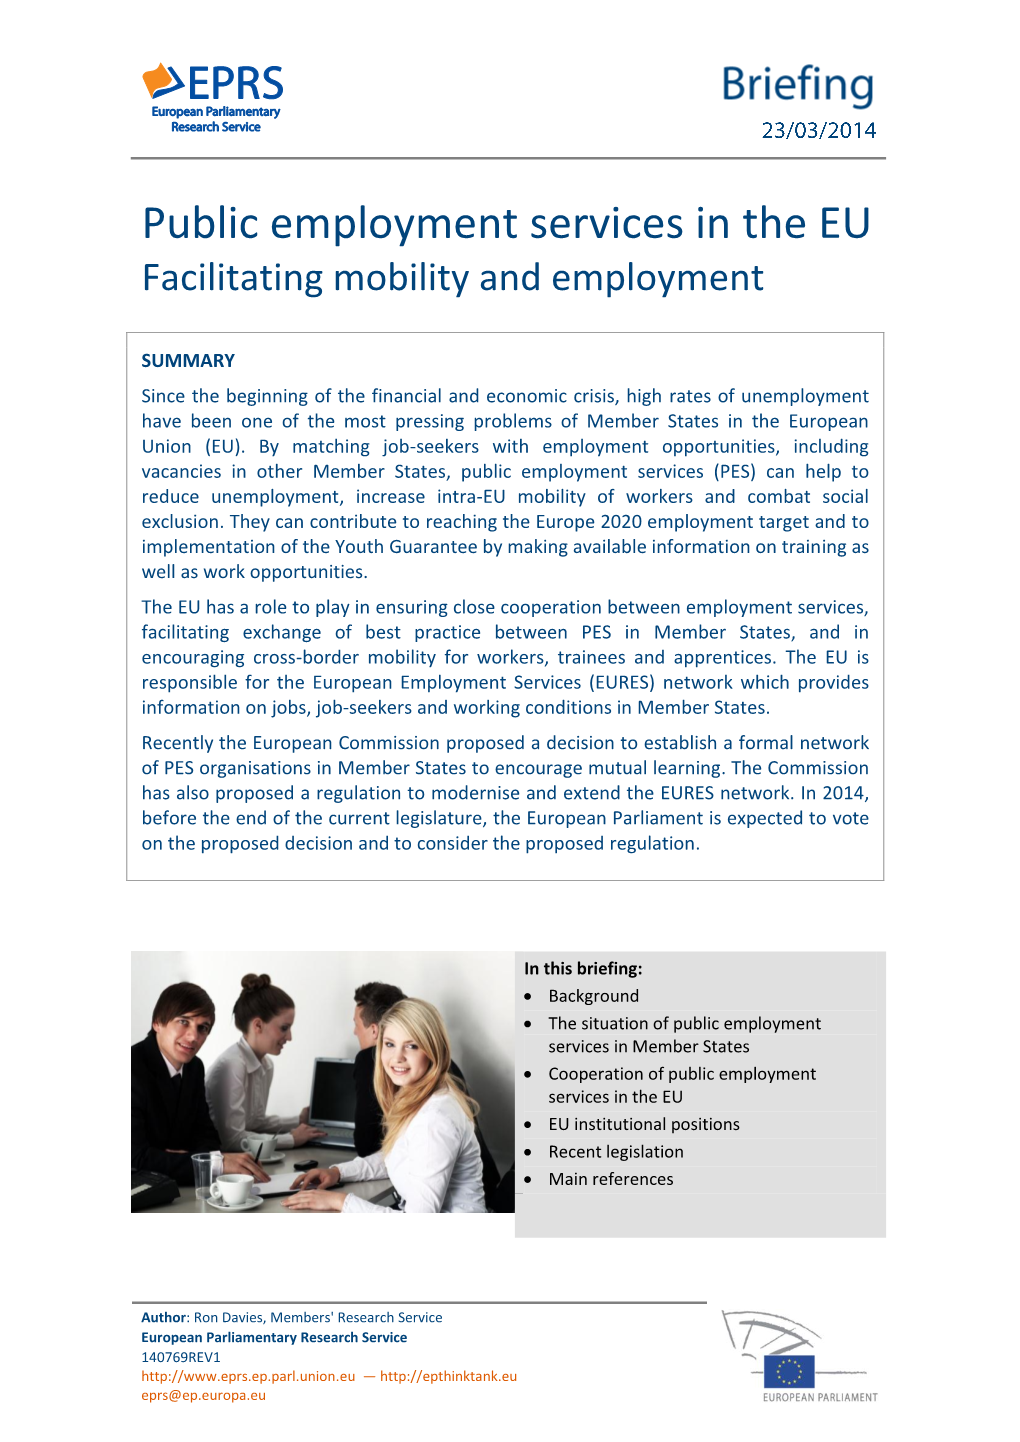 Public Employment Services in the EU Facilitating Mobility and Employment